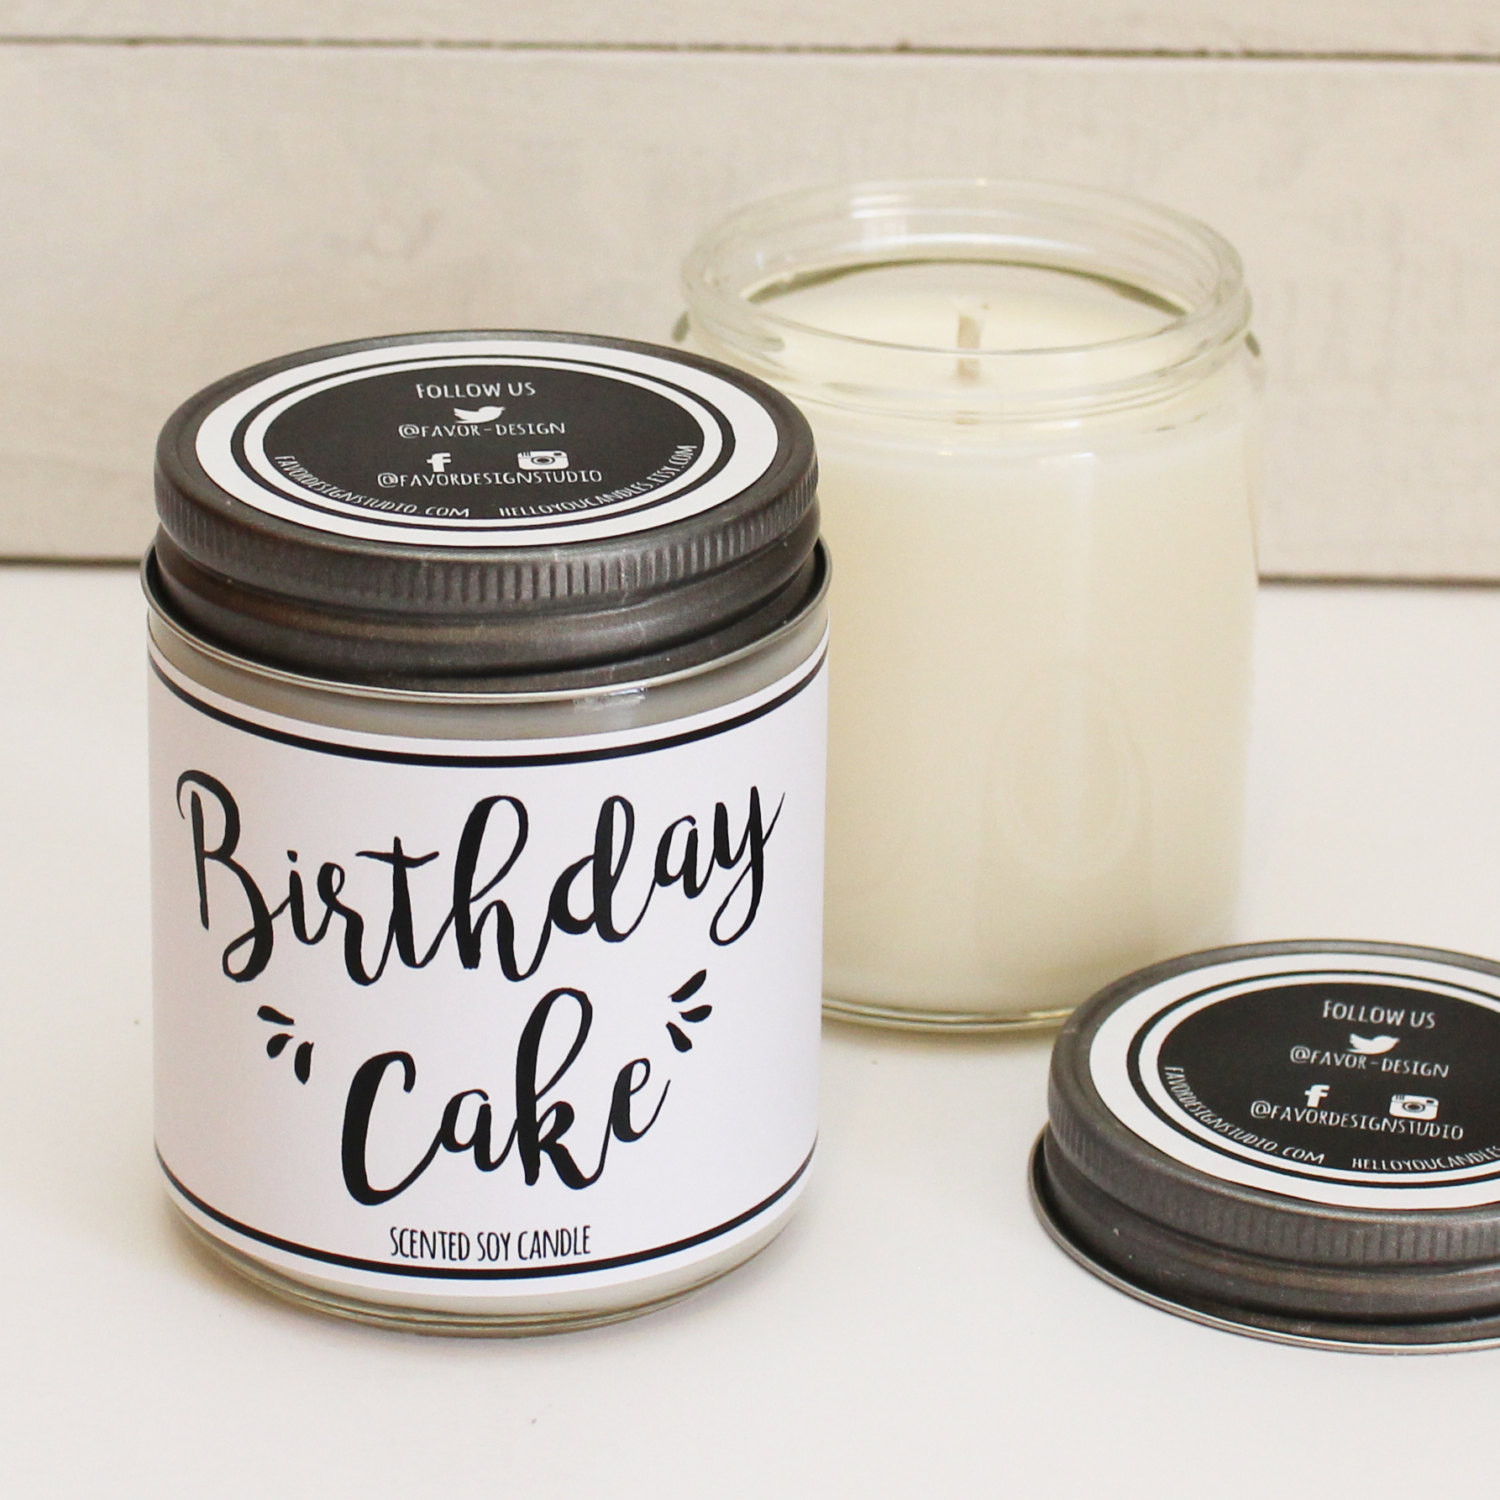 Birthday Cake Scented Candles
 Birthday Cake Scented Candle 8 oz Candle Gift Unique